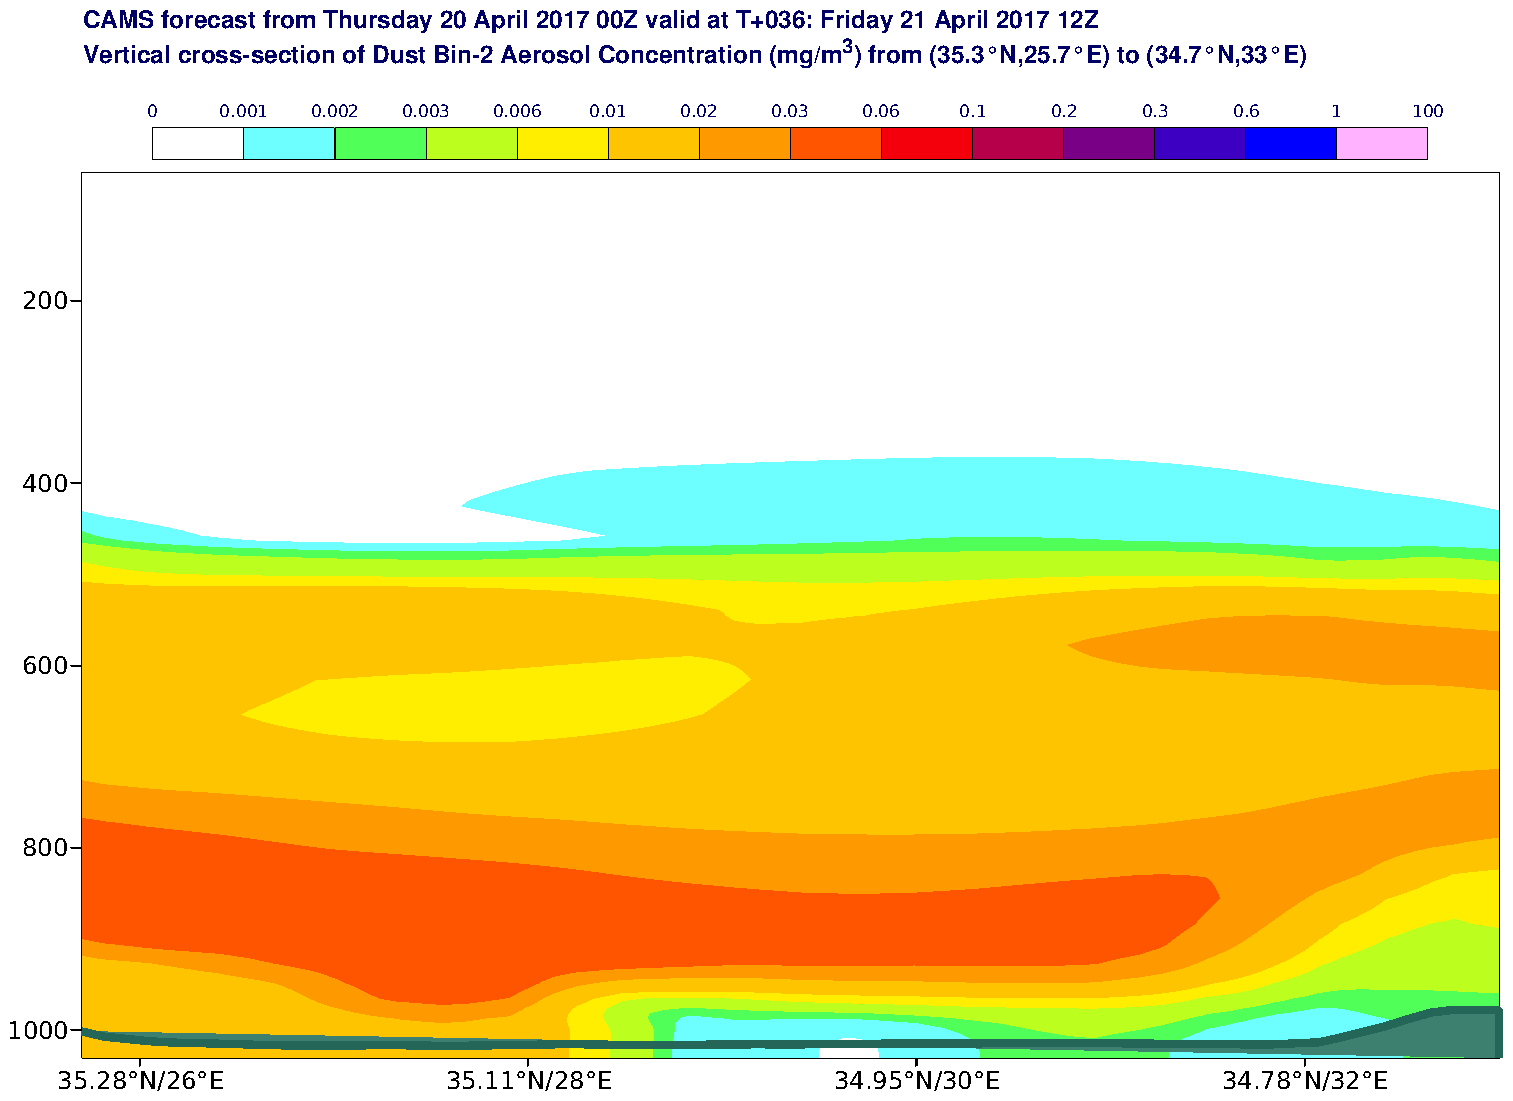 Vertical cross-section of Dust Bin-2 Aerosol Concentration (mg/m3) valid at T36 - 2017-04-21 12:00